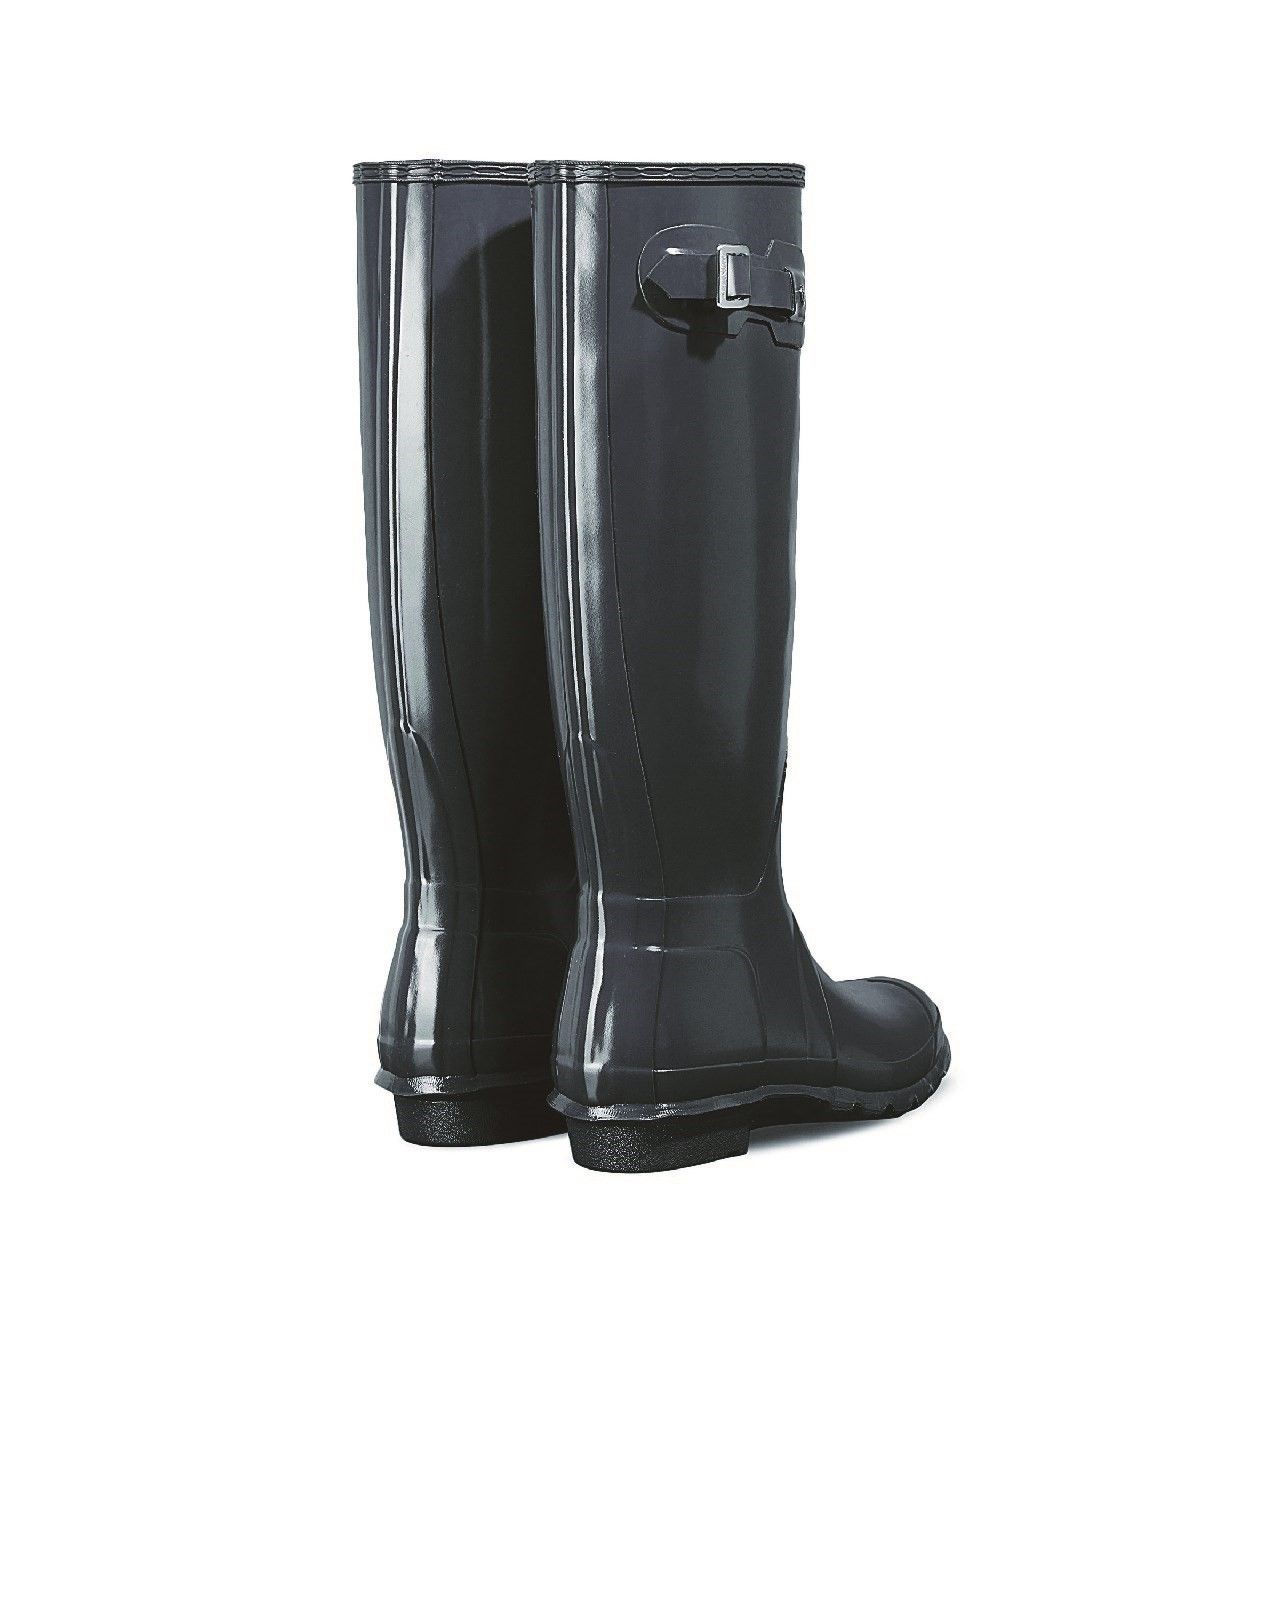 First introduced in 1956, the Original Tall welly is handcrafted from 28 parts and built on the original last for exceptional fit and comfort. This particular style is finished in a high gloss. Handcrafted Waterproof Textile lining Original calendered outsole Adjustable strap to enhance fit Natural rubber